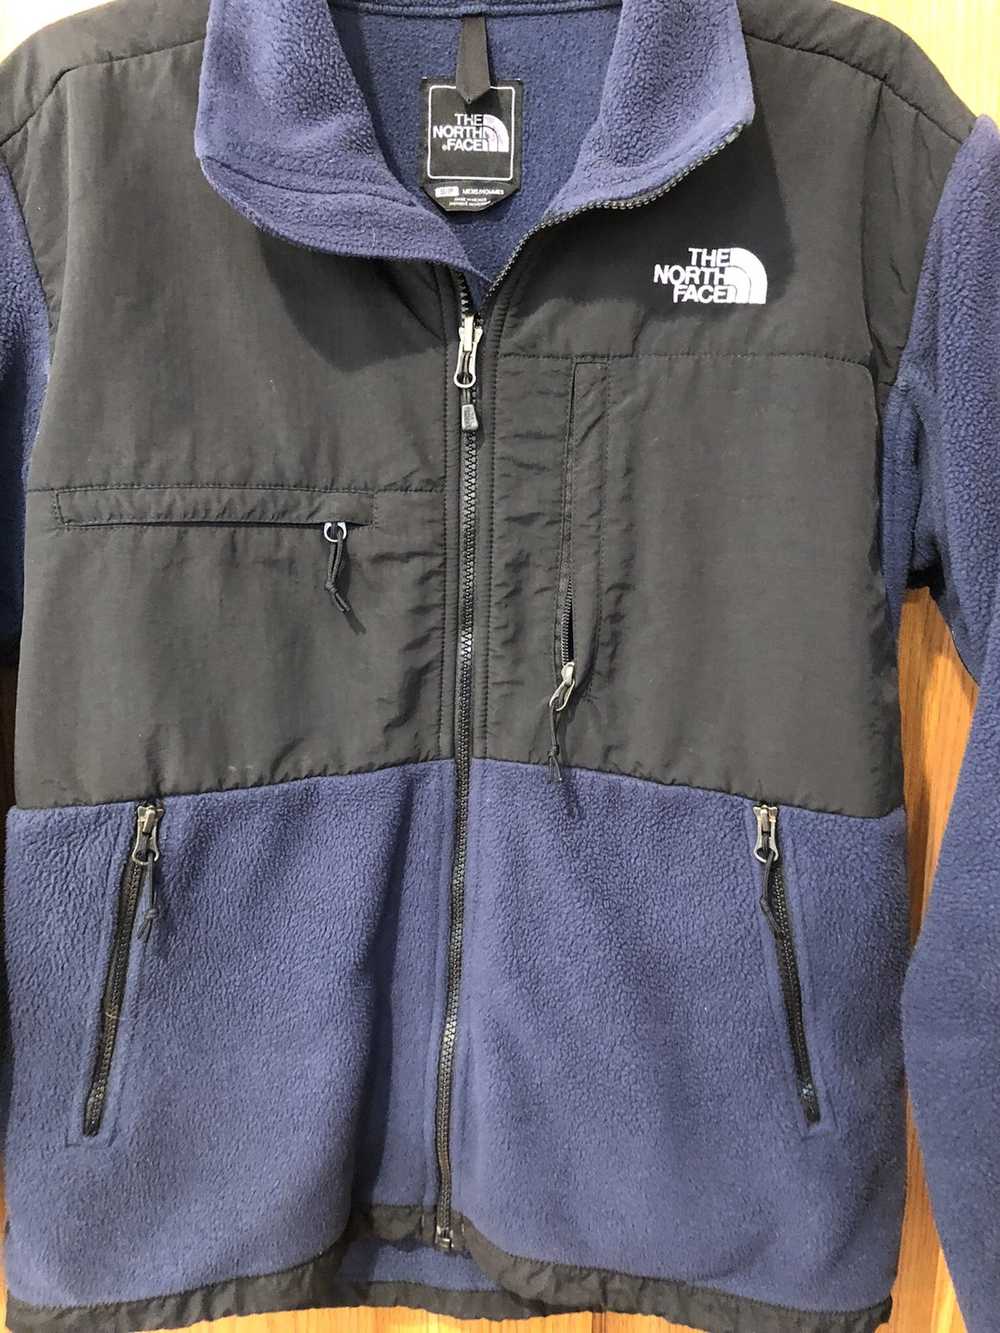 The North Face North Face Fleece - image 2